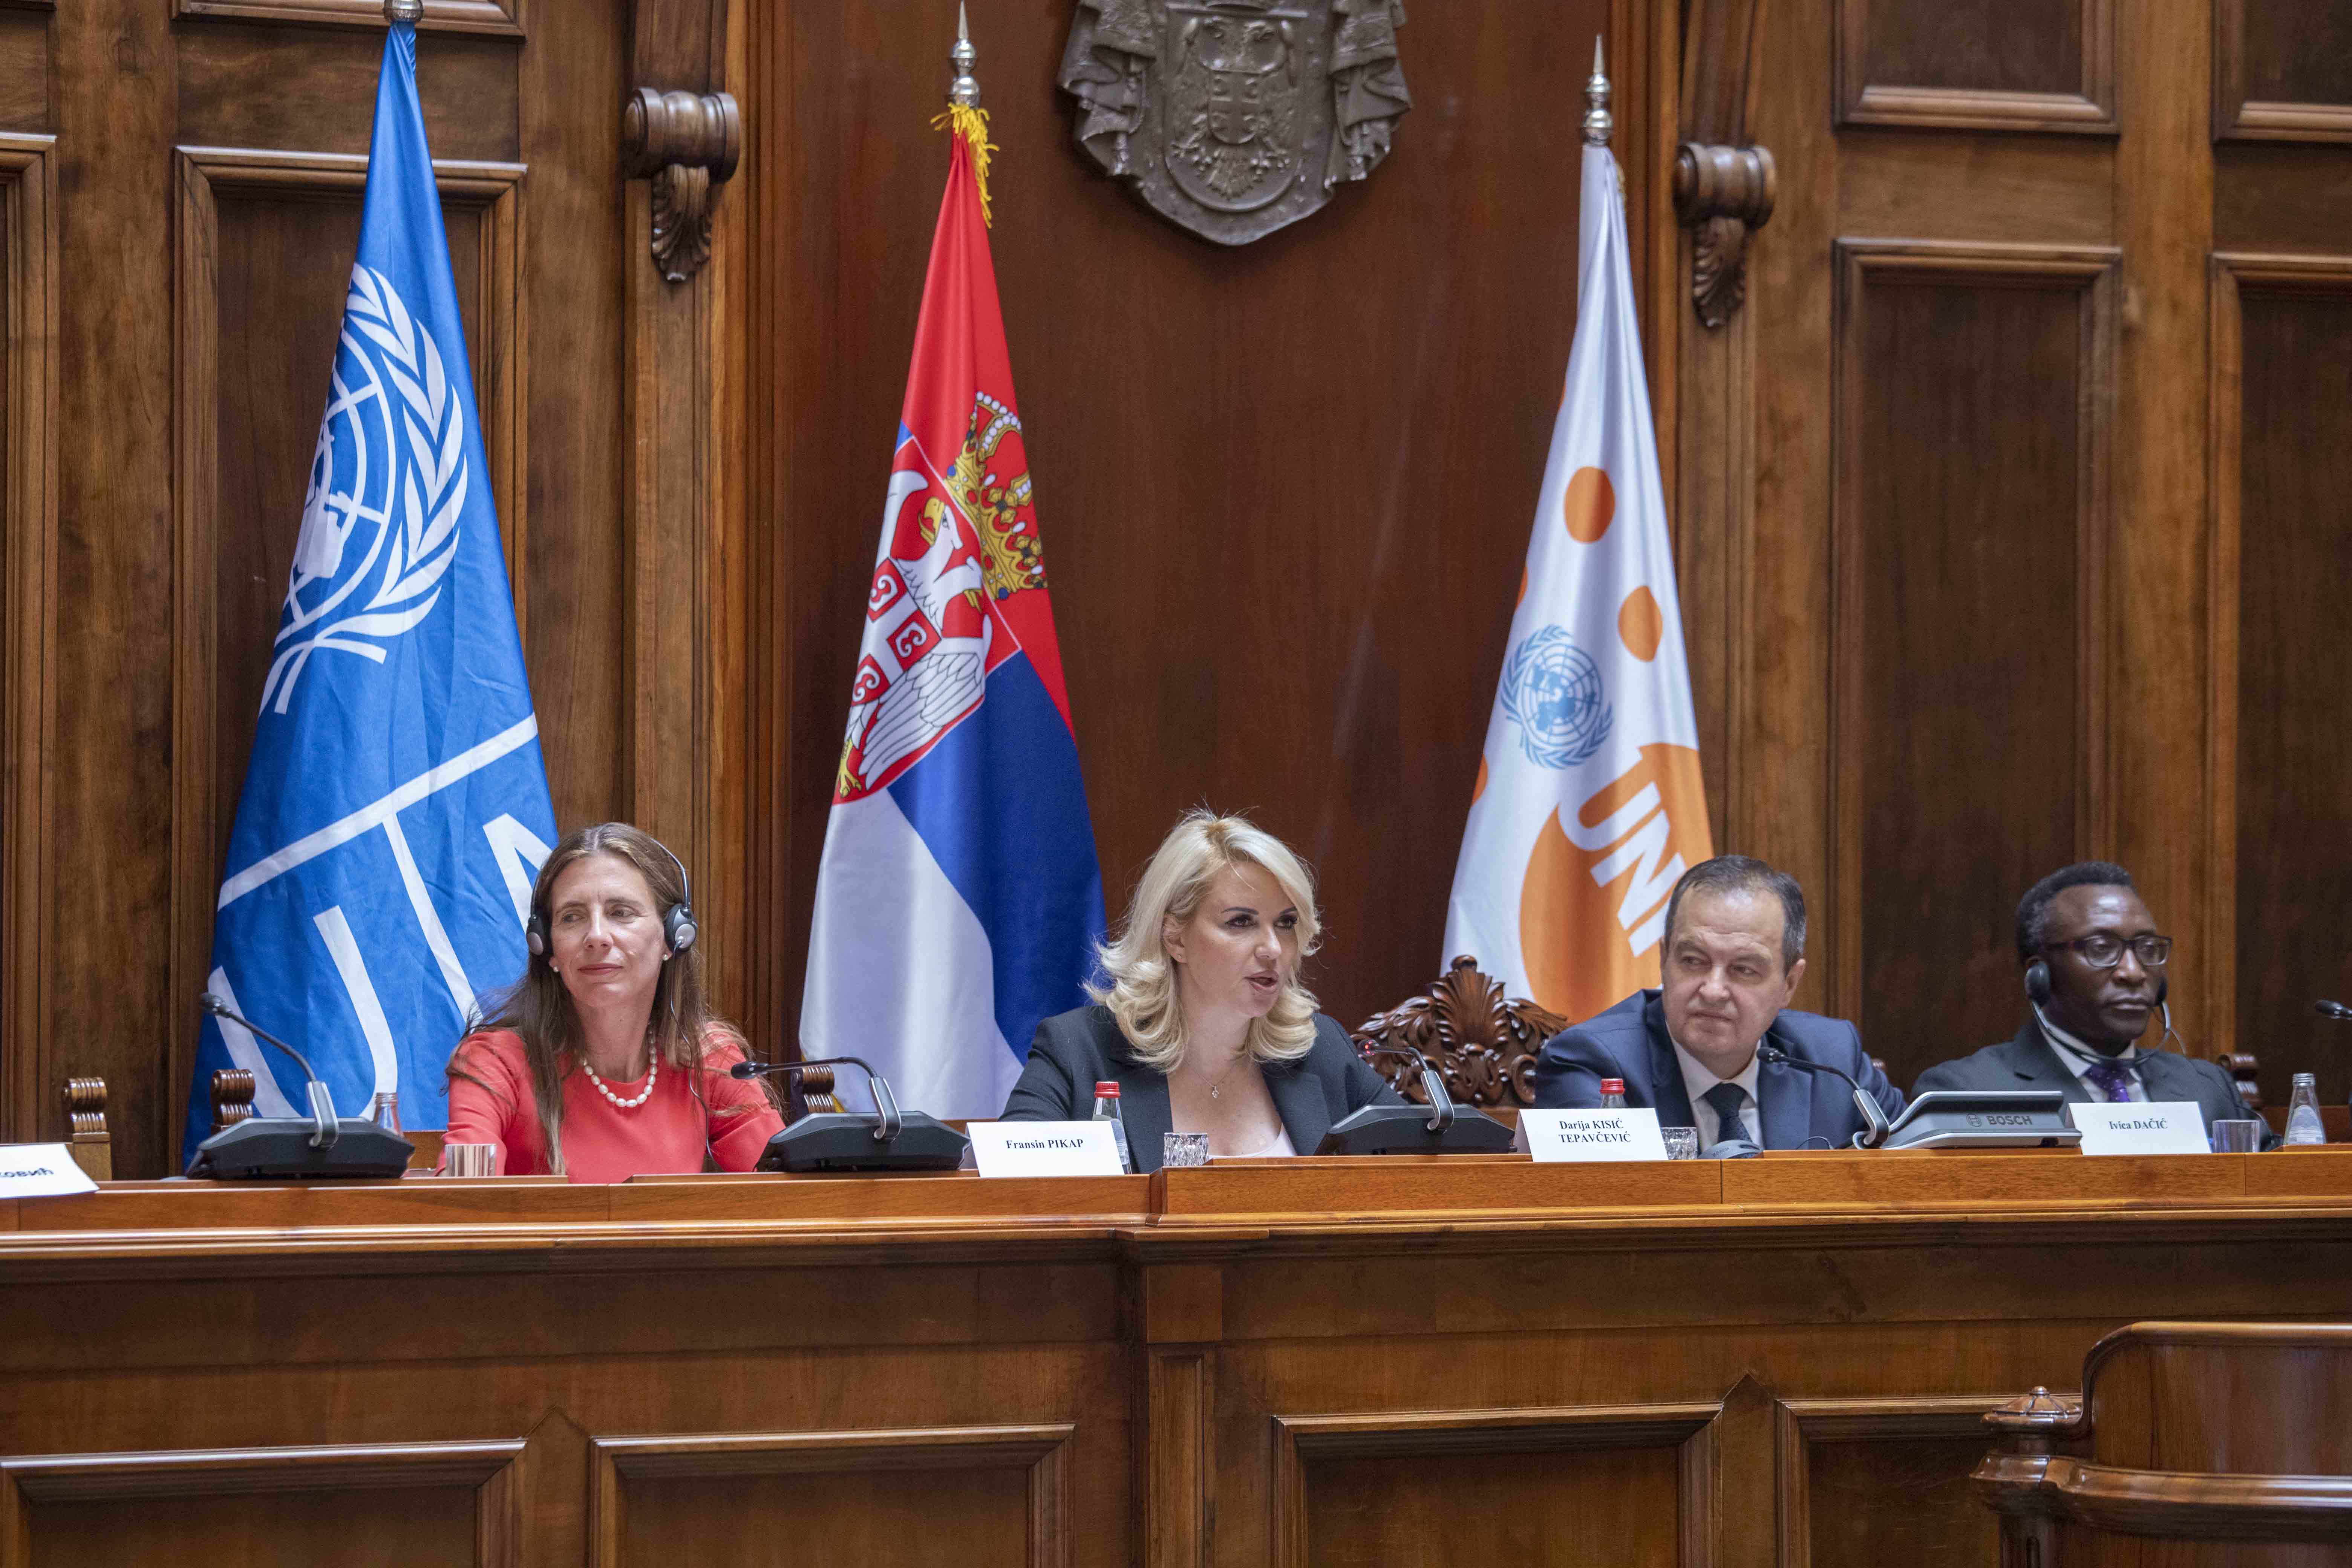 Human Development Report presented in National Assembly of Serbia